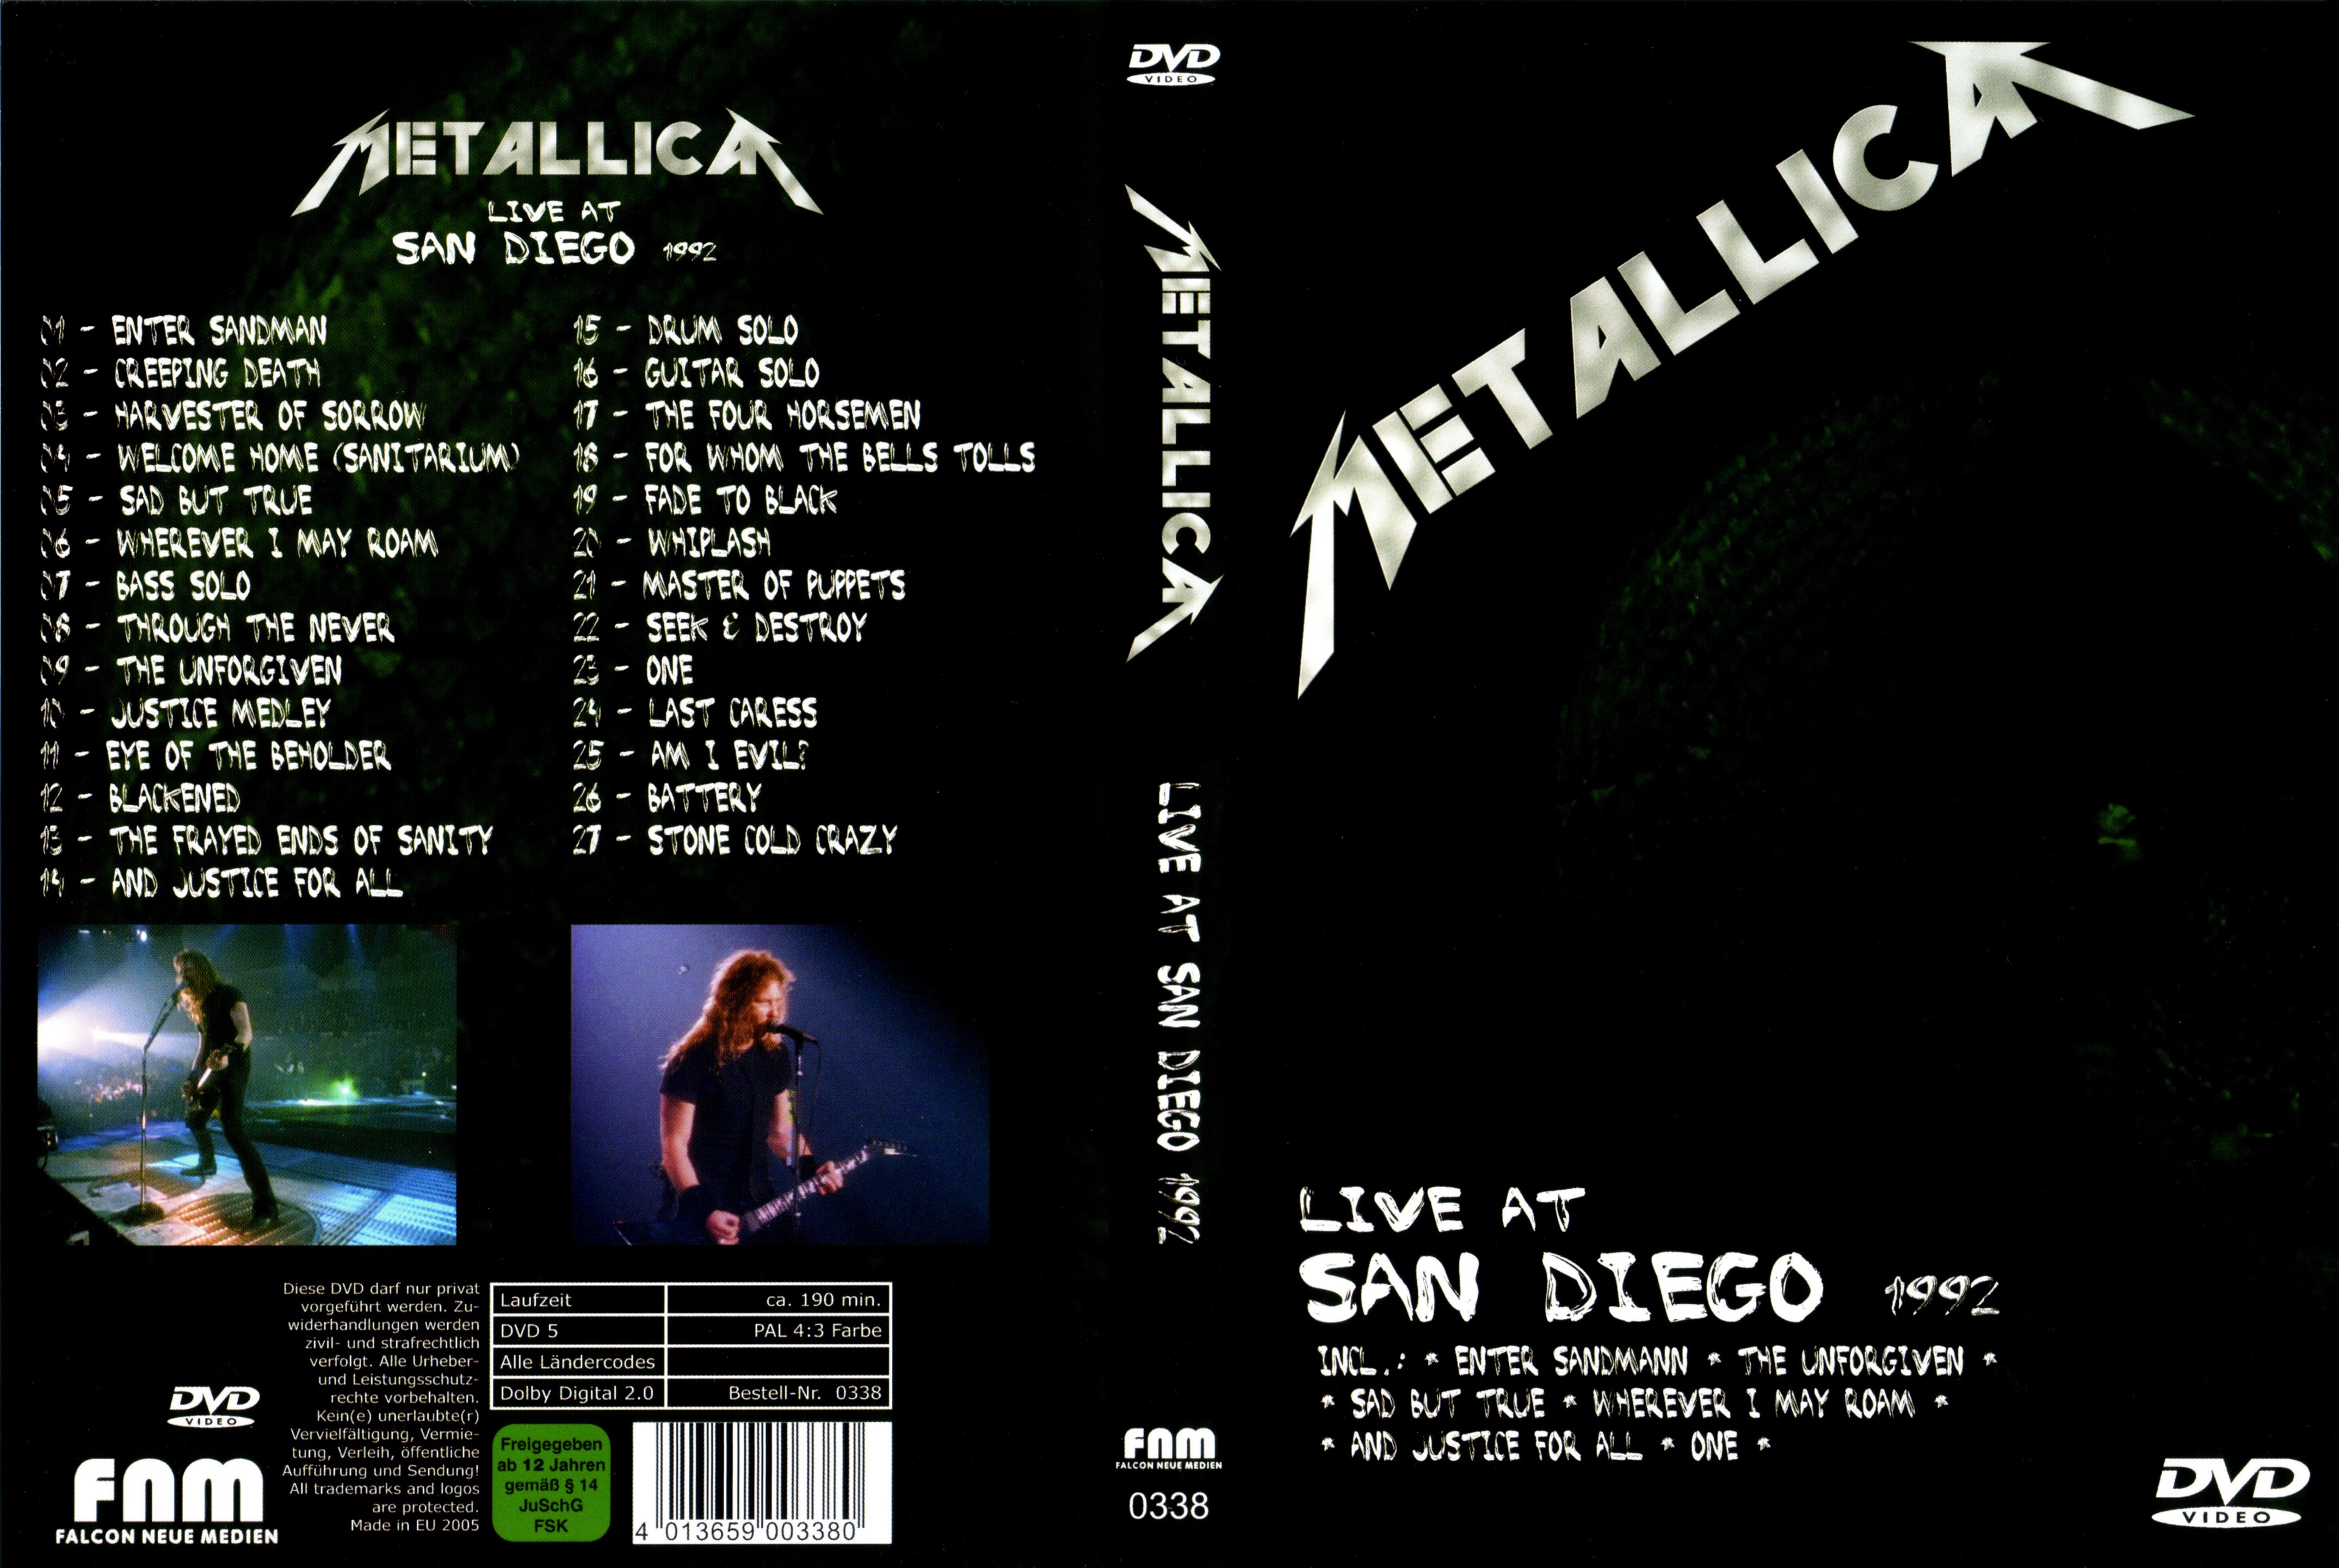 Jaquette DVD Metallica live at San Diego 1992